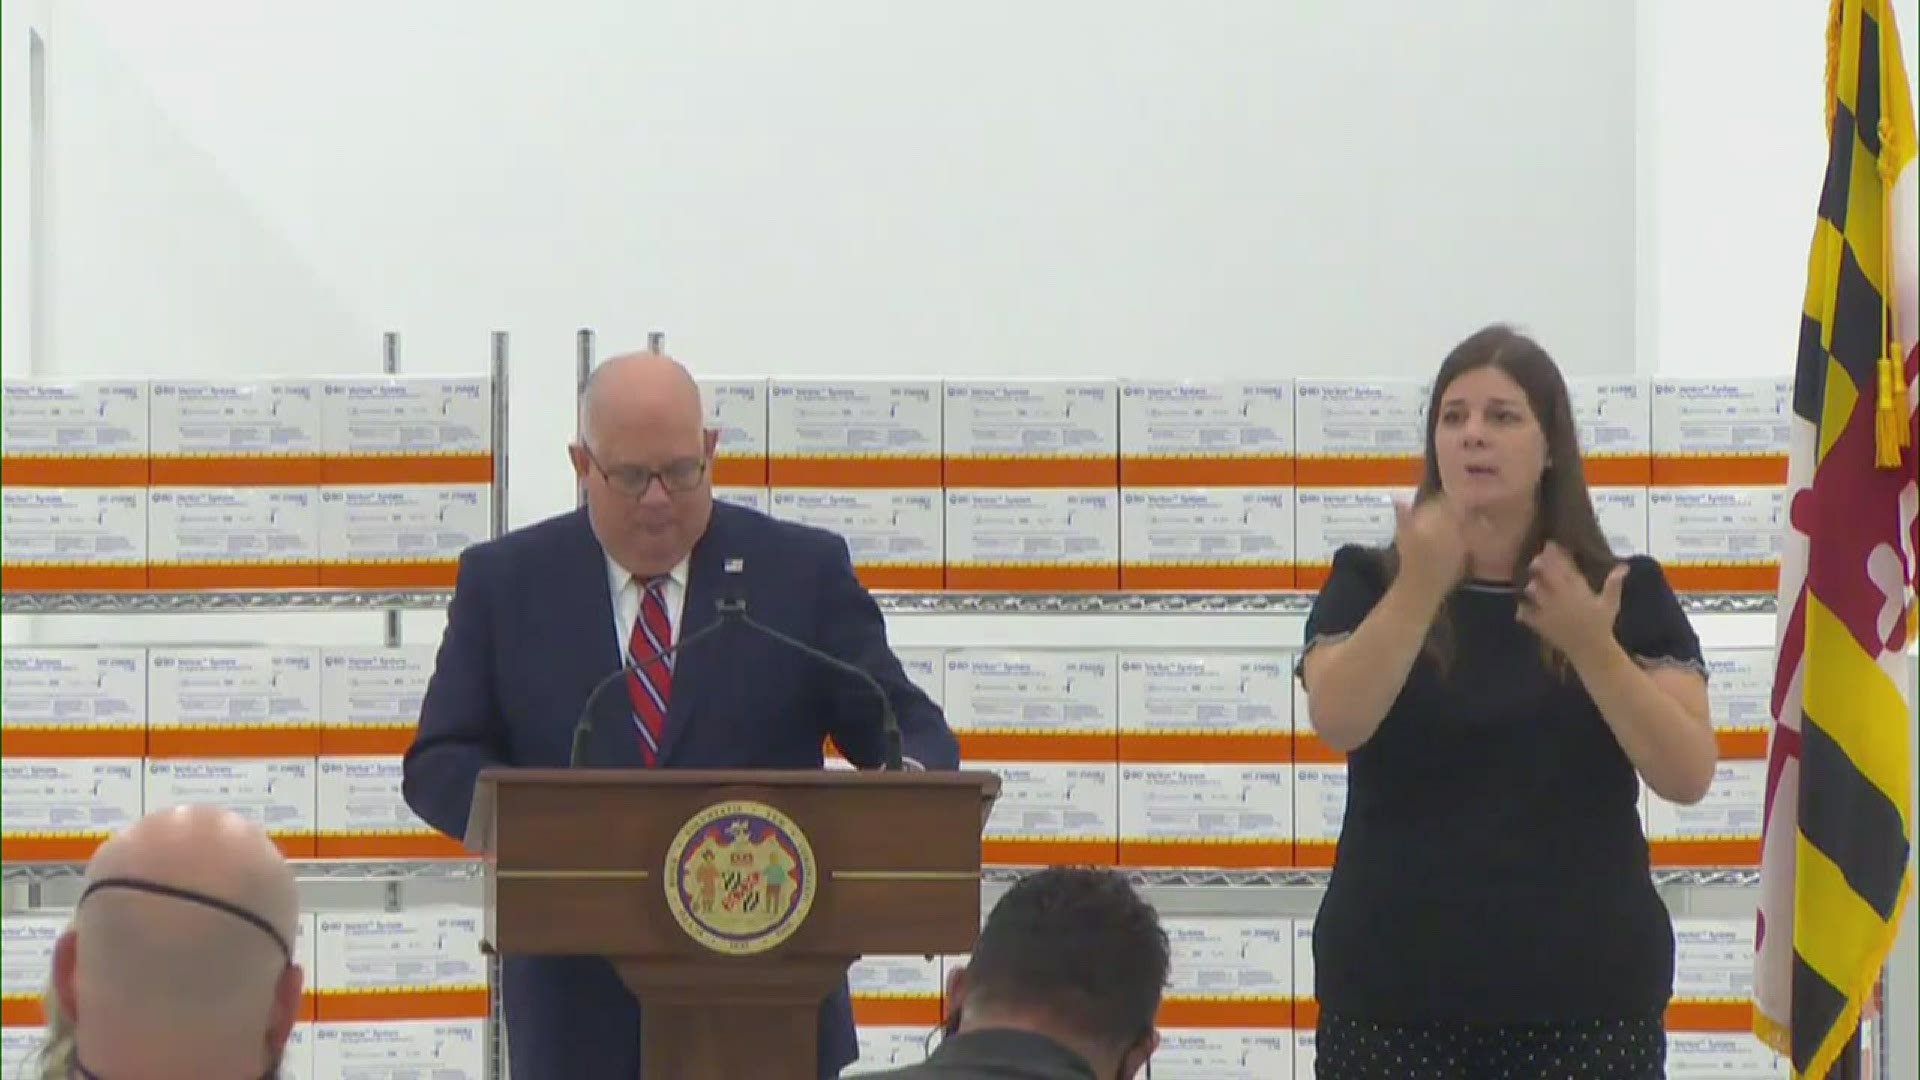 Maryland is teaming up with several states to ramp up on rapid COVID-19 testing, Gov. Larry Hogan says.